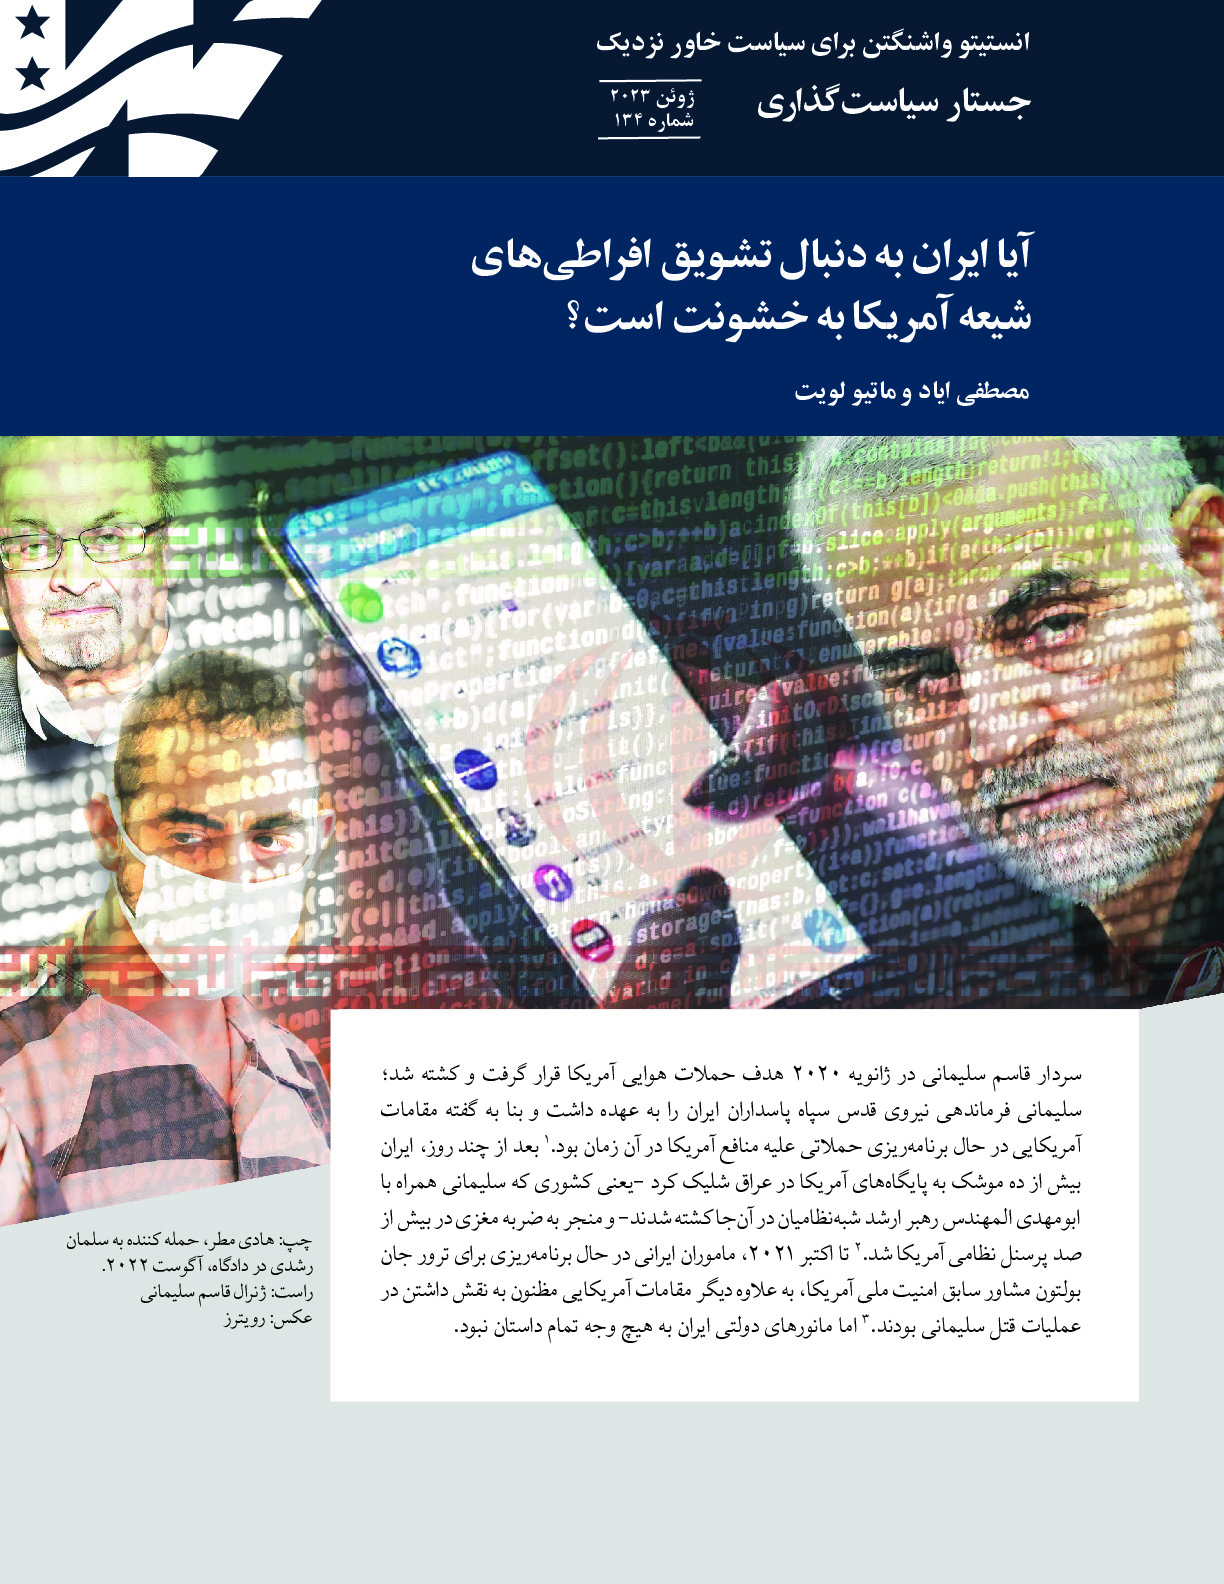 Is Iran Looking to Inspire Shia Homegrown Violent Extremist Attacks-Persian edition.pdf